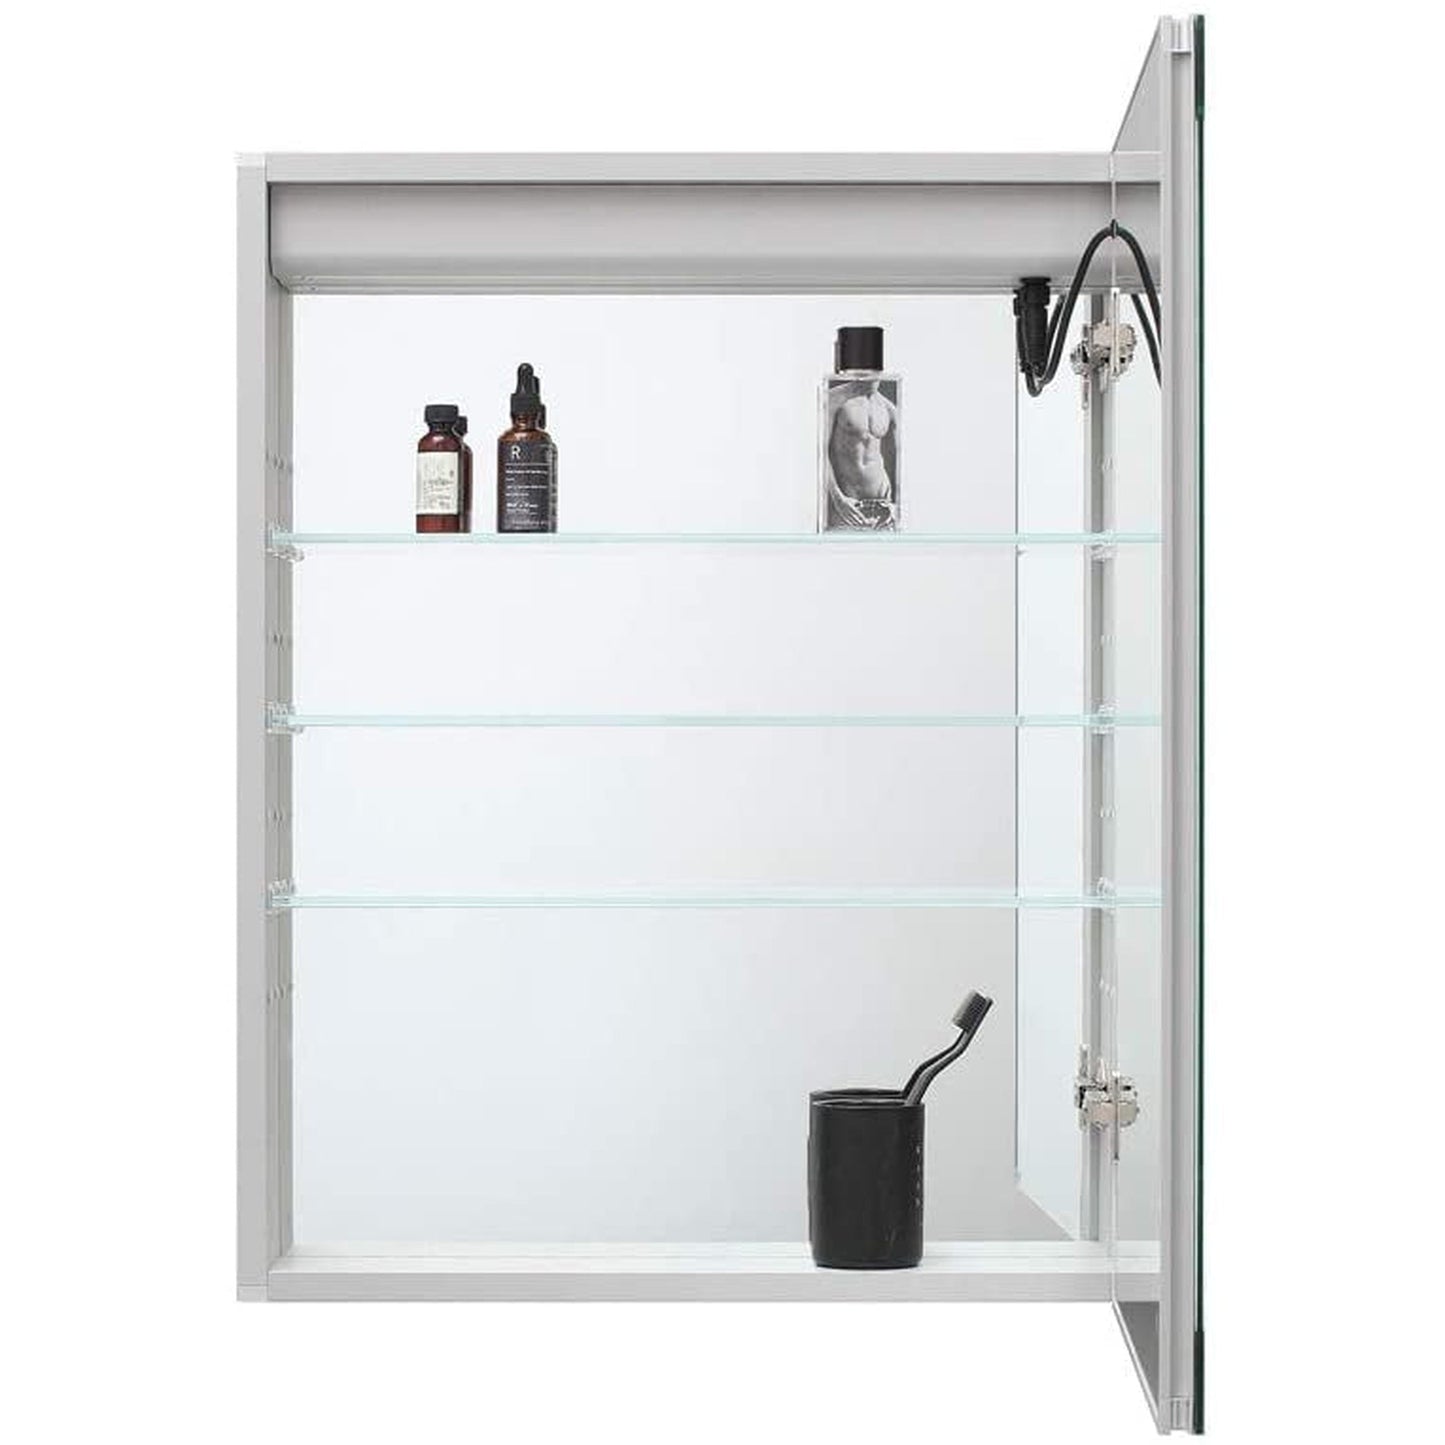 Aquadom Royale Basic 30" x 30" Single View Right Hinged Recessed or Surface Mount Medicine Cabinet With LED Lighting, Touch Screen Button, Dimmer